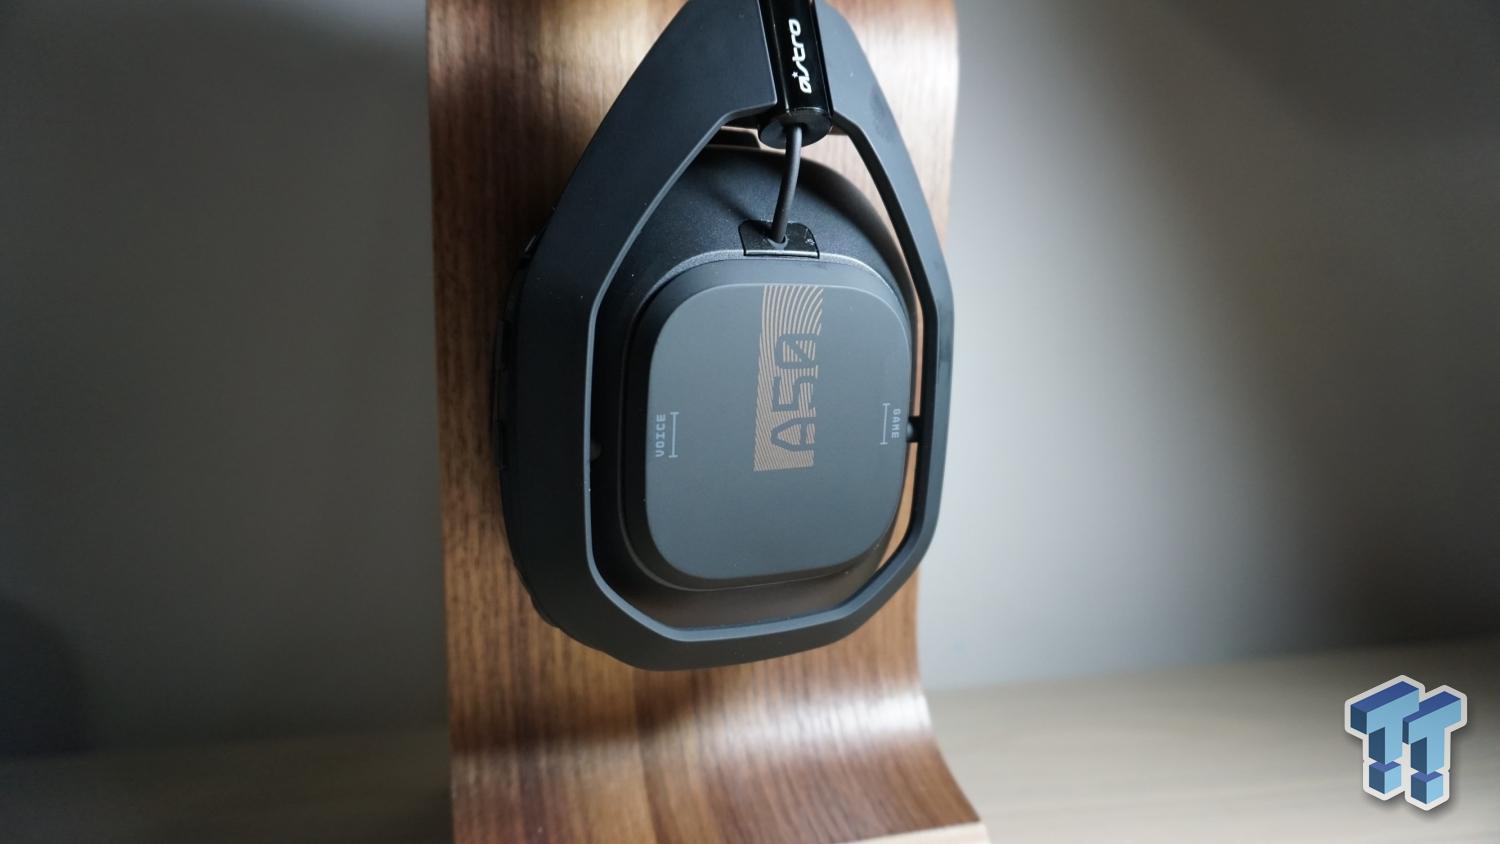 Astro A50 Headset + Base Station (Hardware) Review